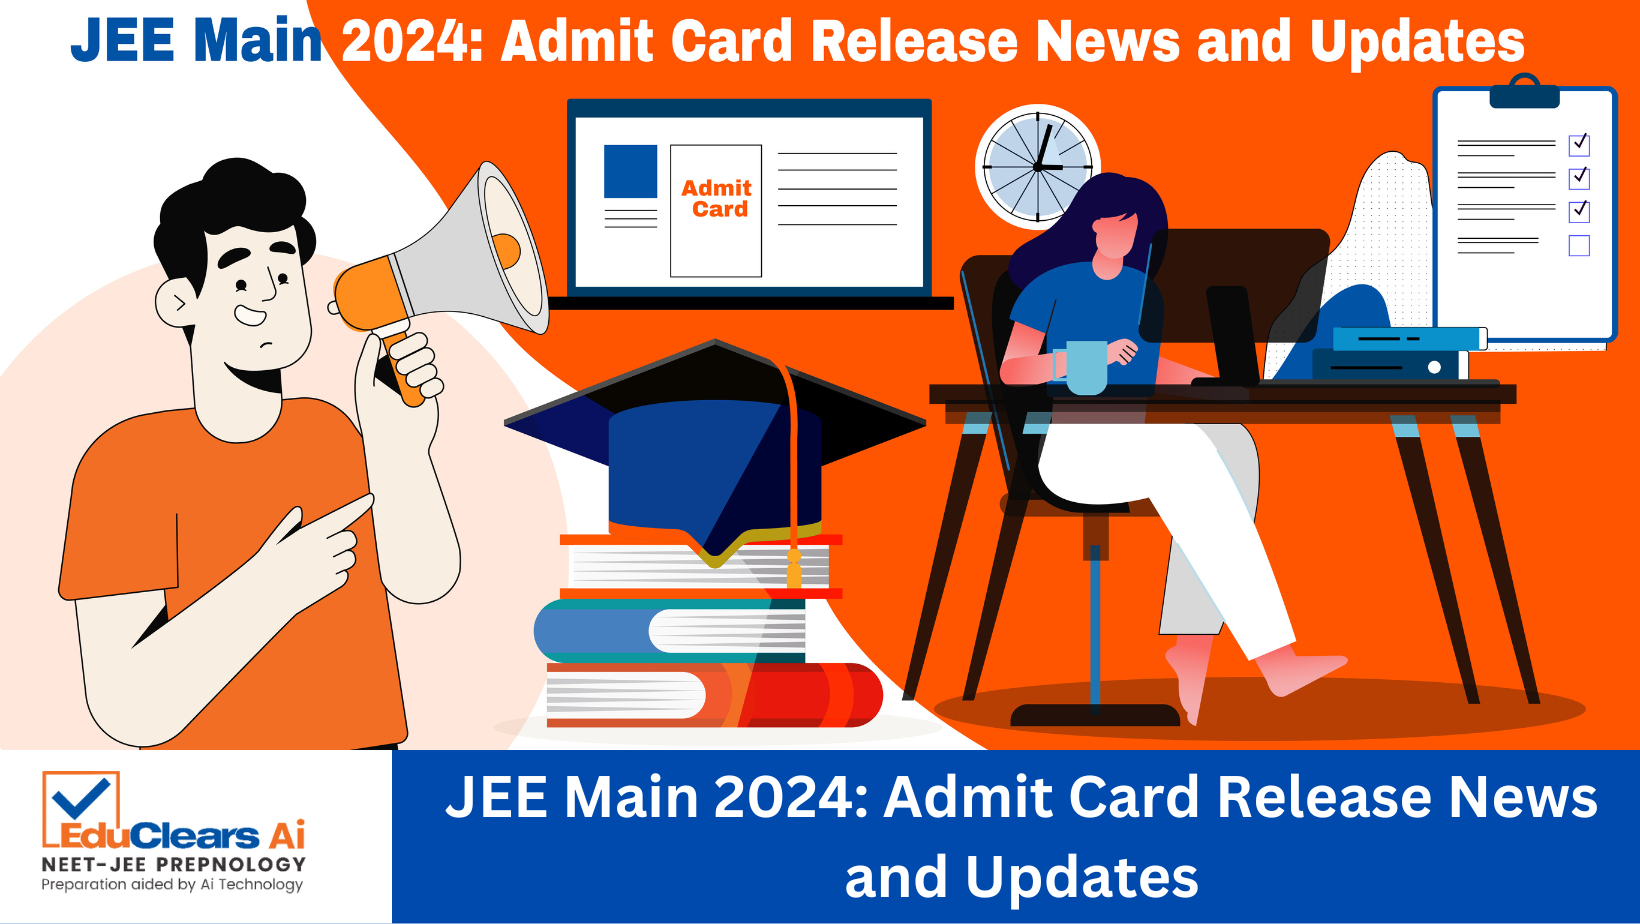 JEE Main 2024 Admit Card Release News and Updates